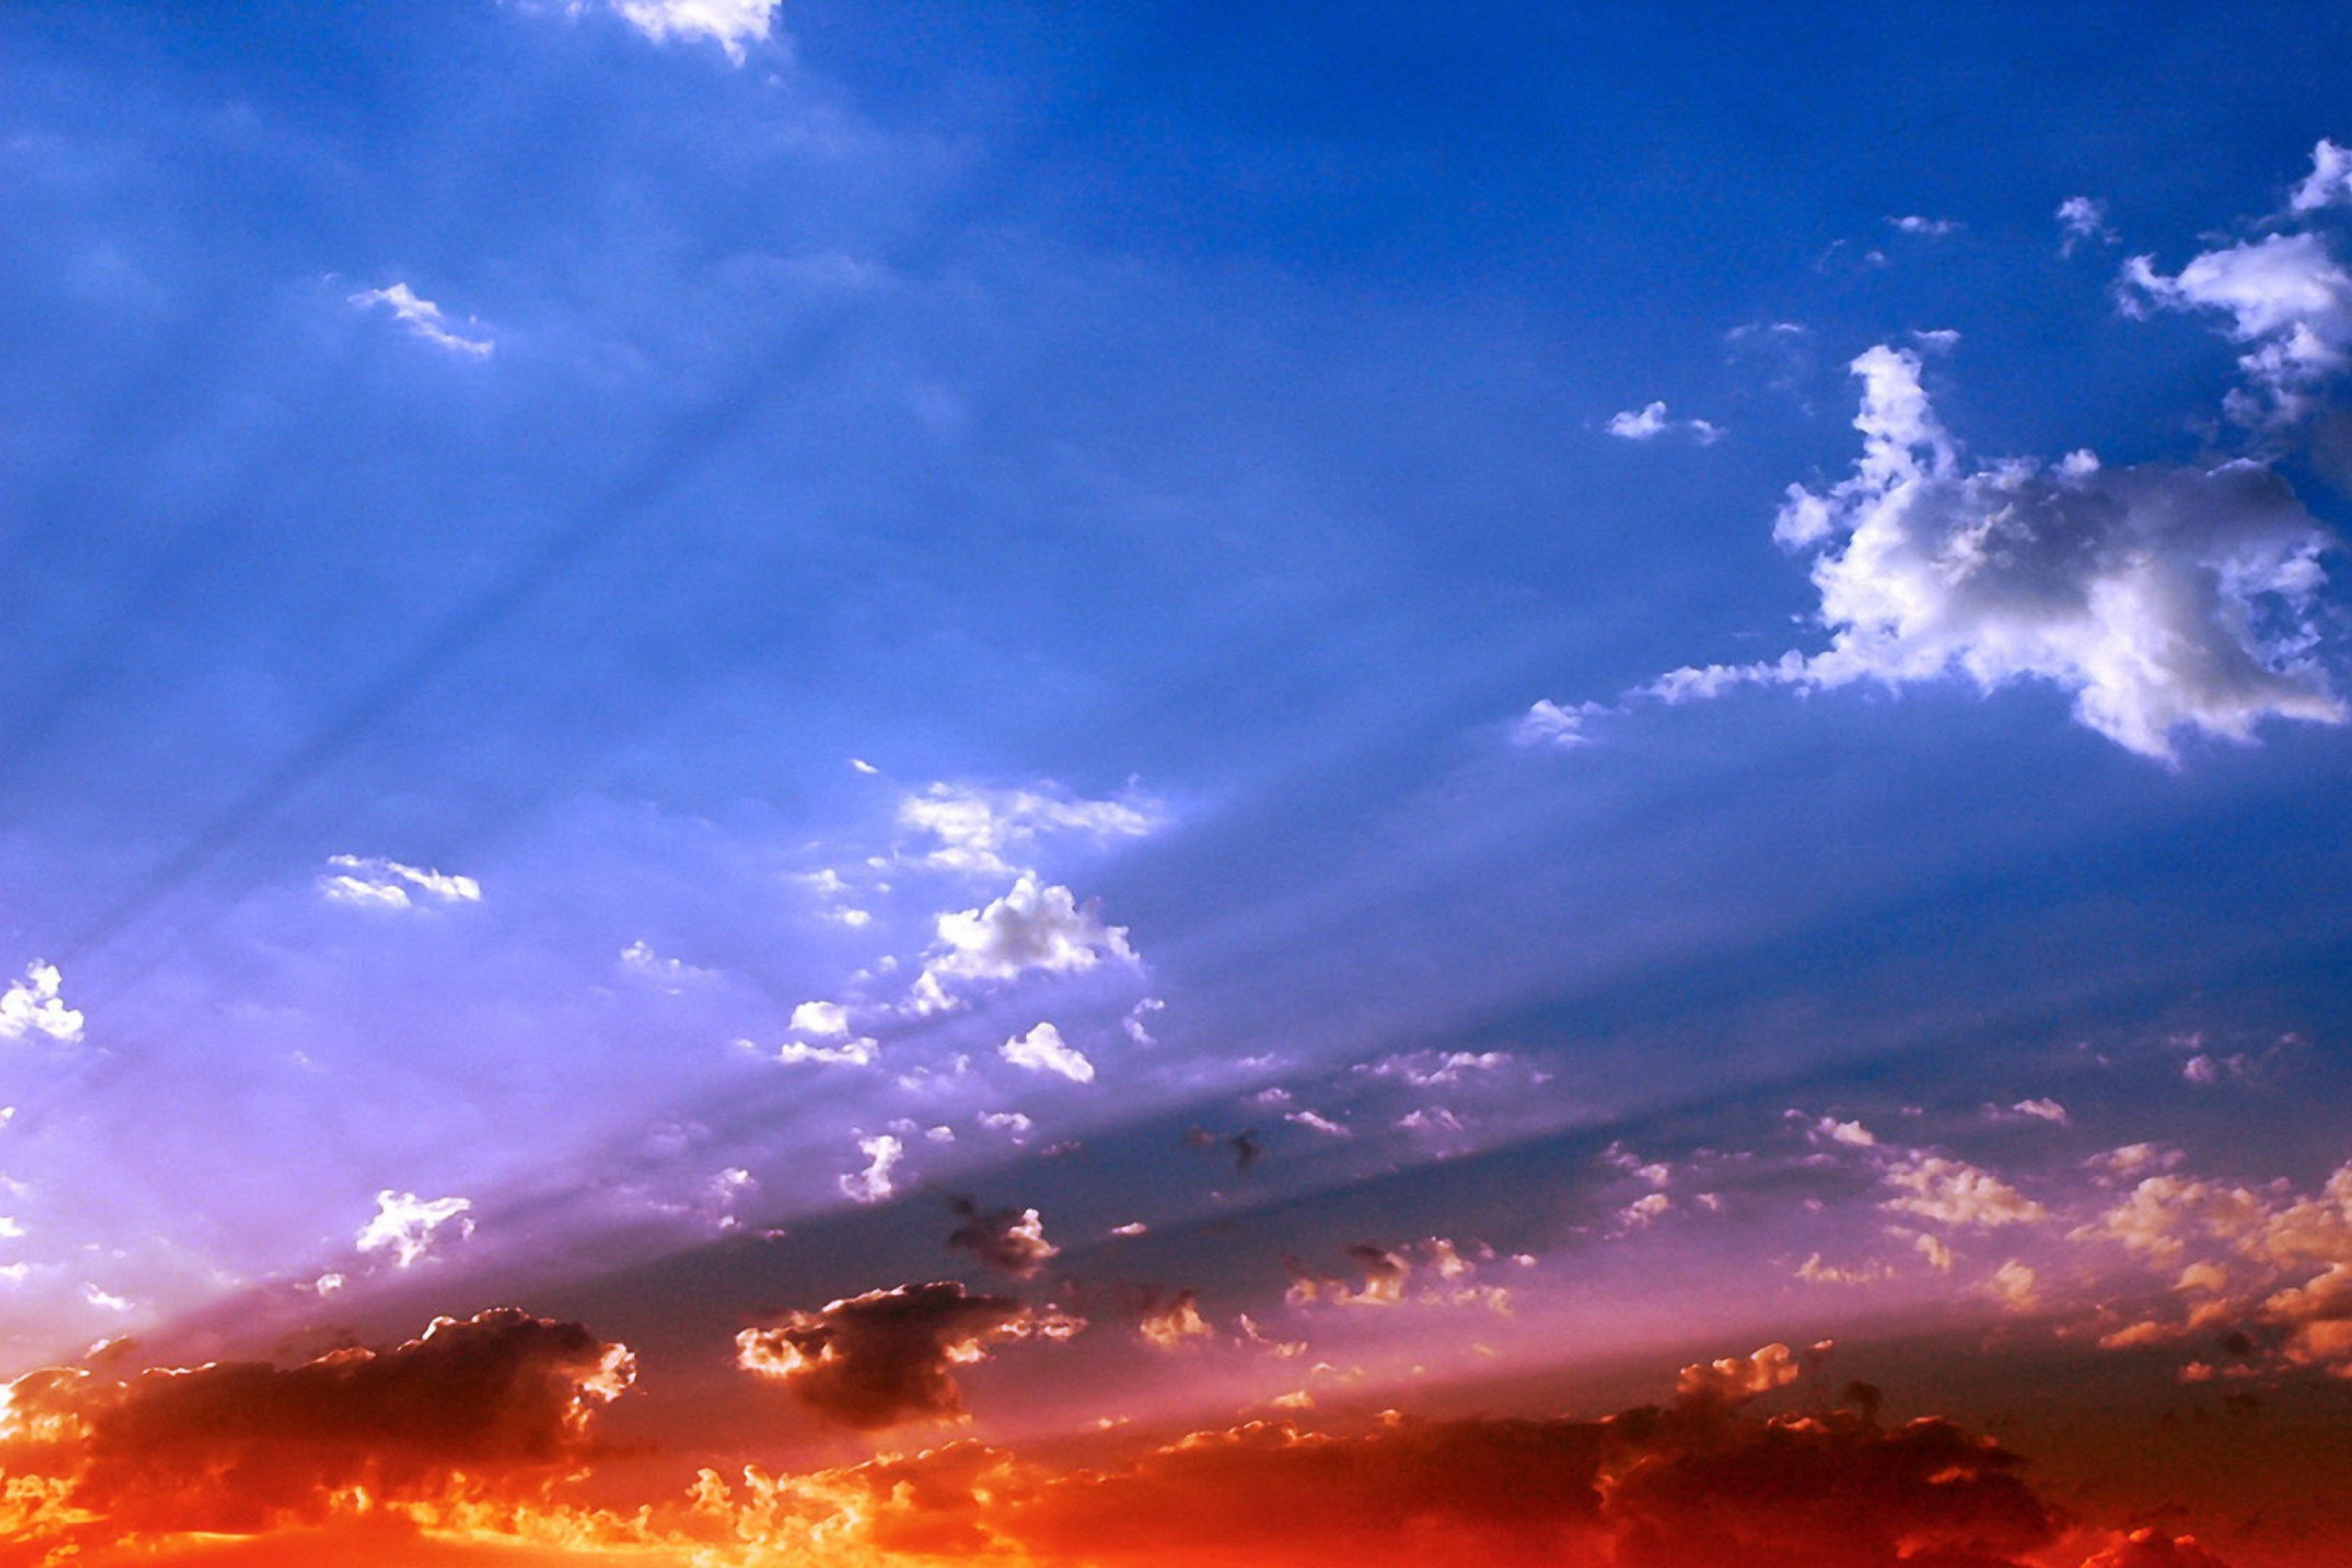 Blue Sky And Red Sunset wallpaper 2880x1920